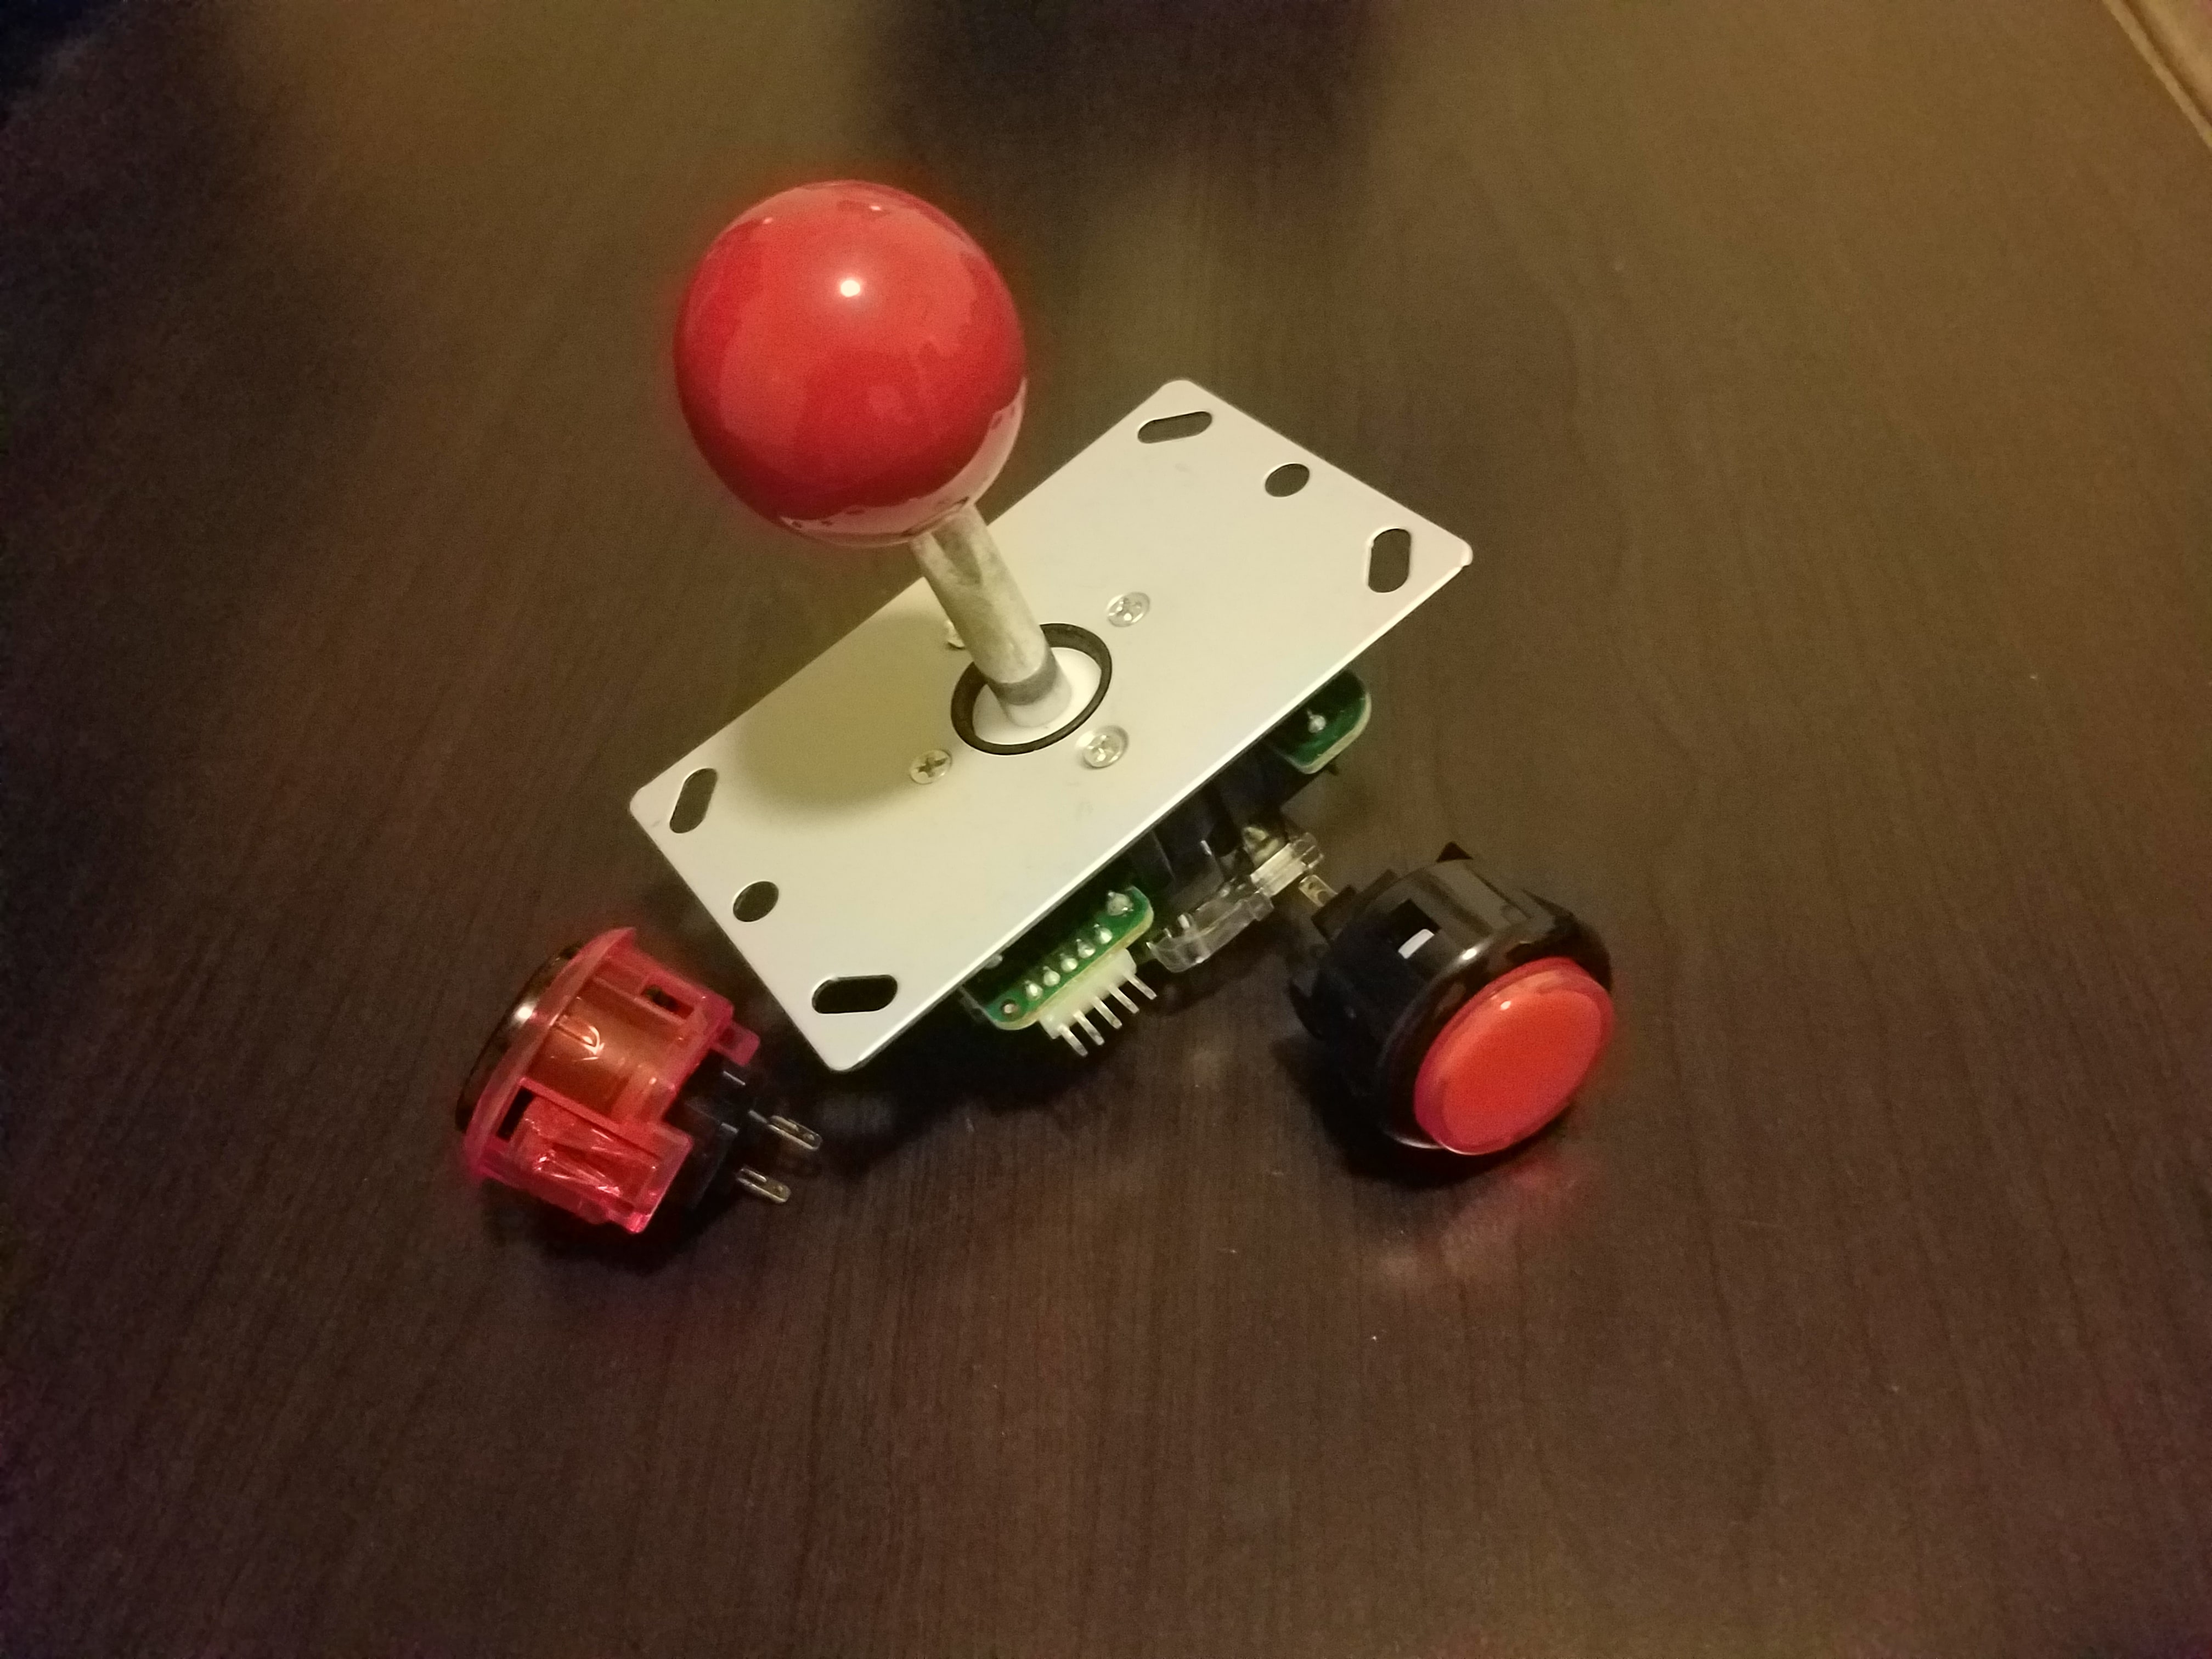 Photograph of buttons and lever for a custom arcade stick